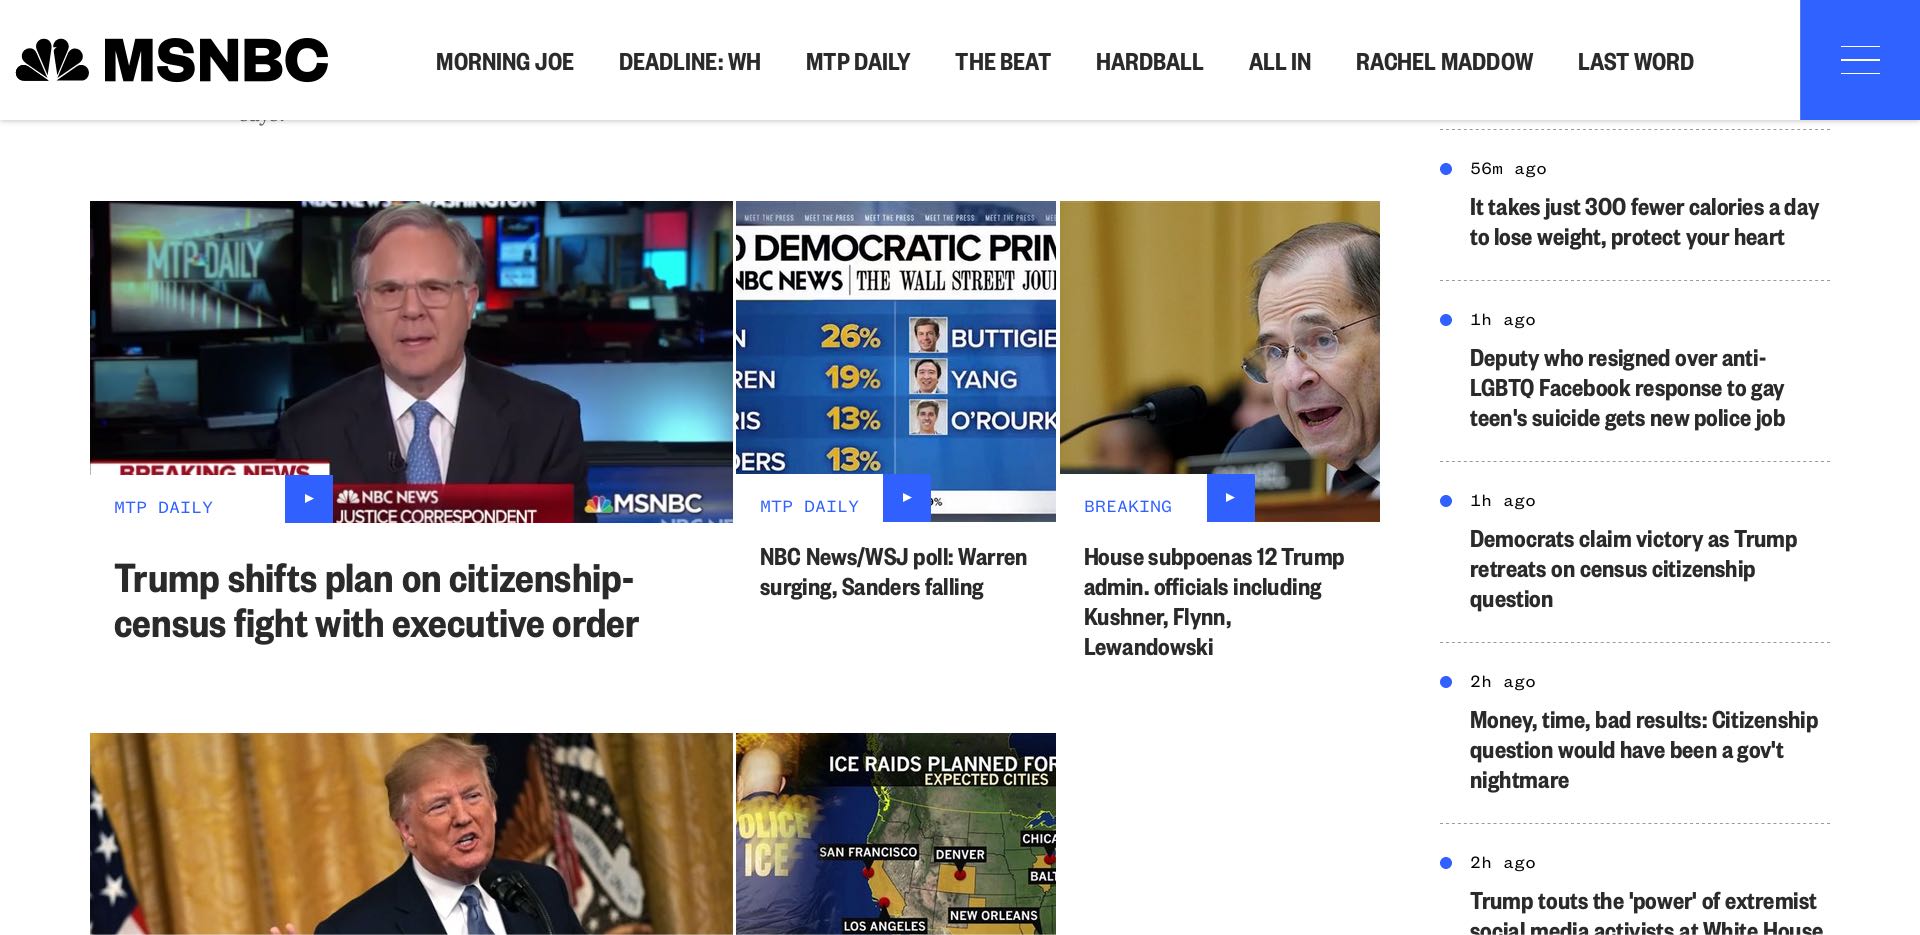 The MSNBC home page on July 7, 2019 